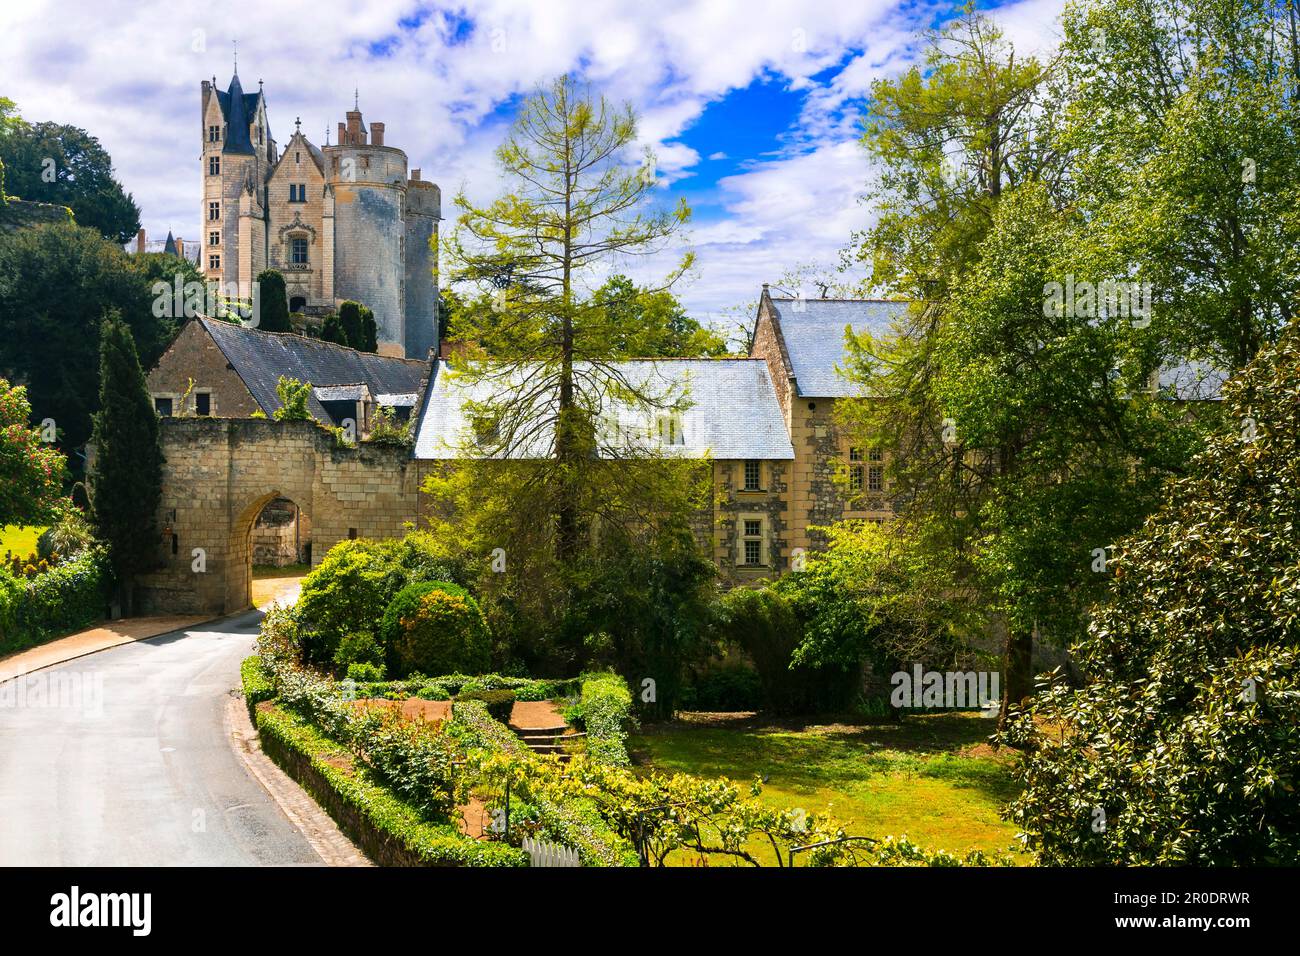 Great medieval castles of Loire valley - Montreuil-Bellay. France Stock Photo